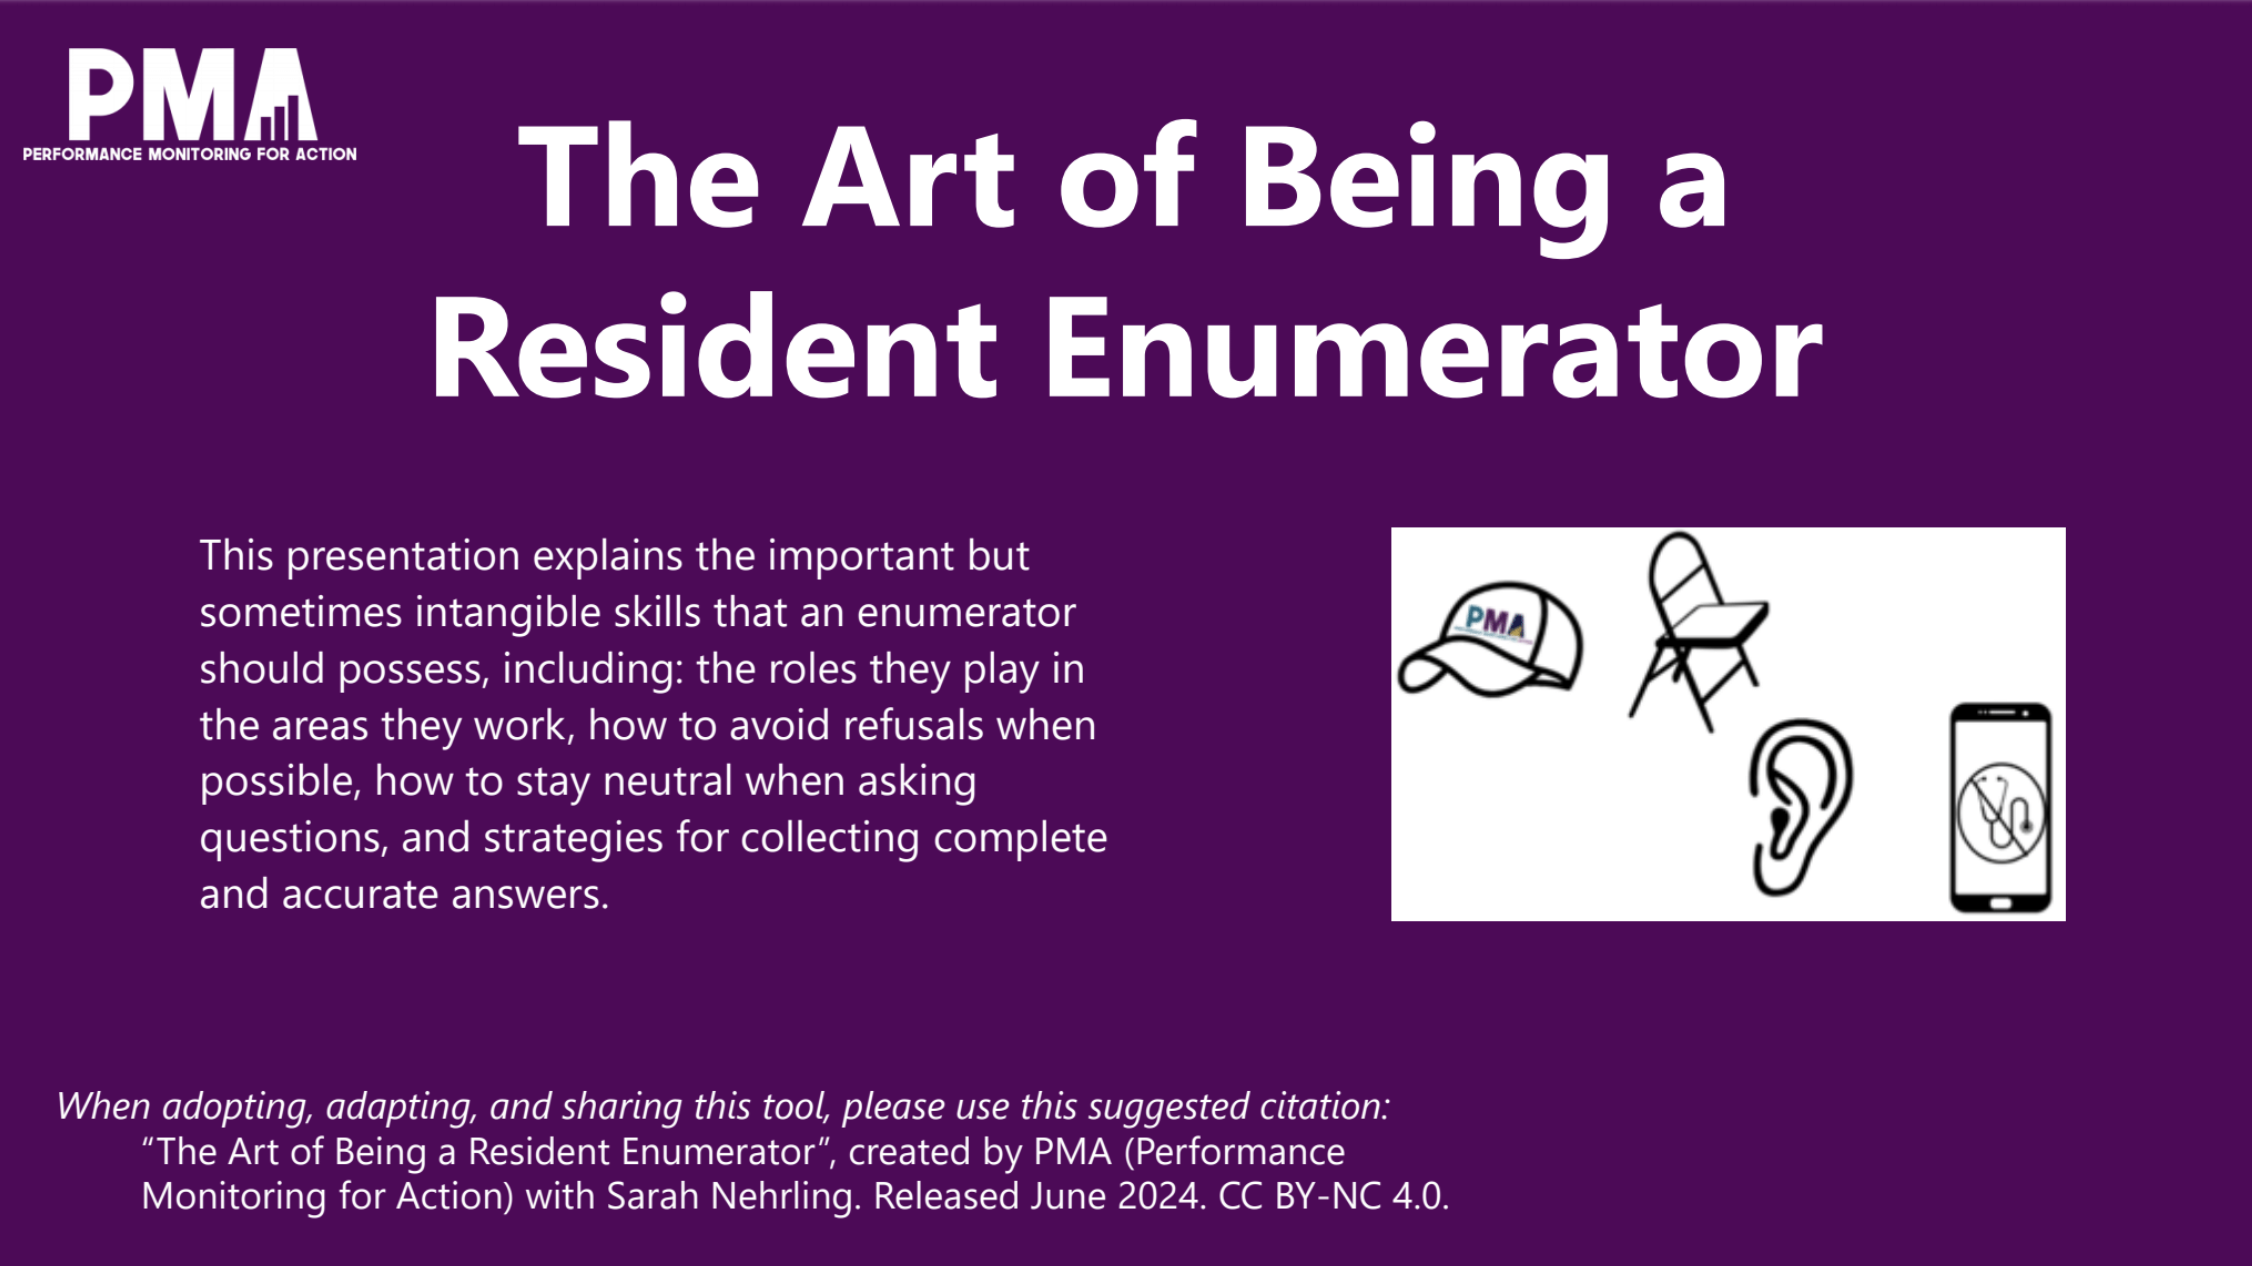 Art of Being a Resident Enumerator